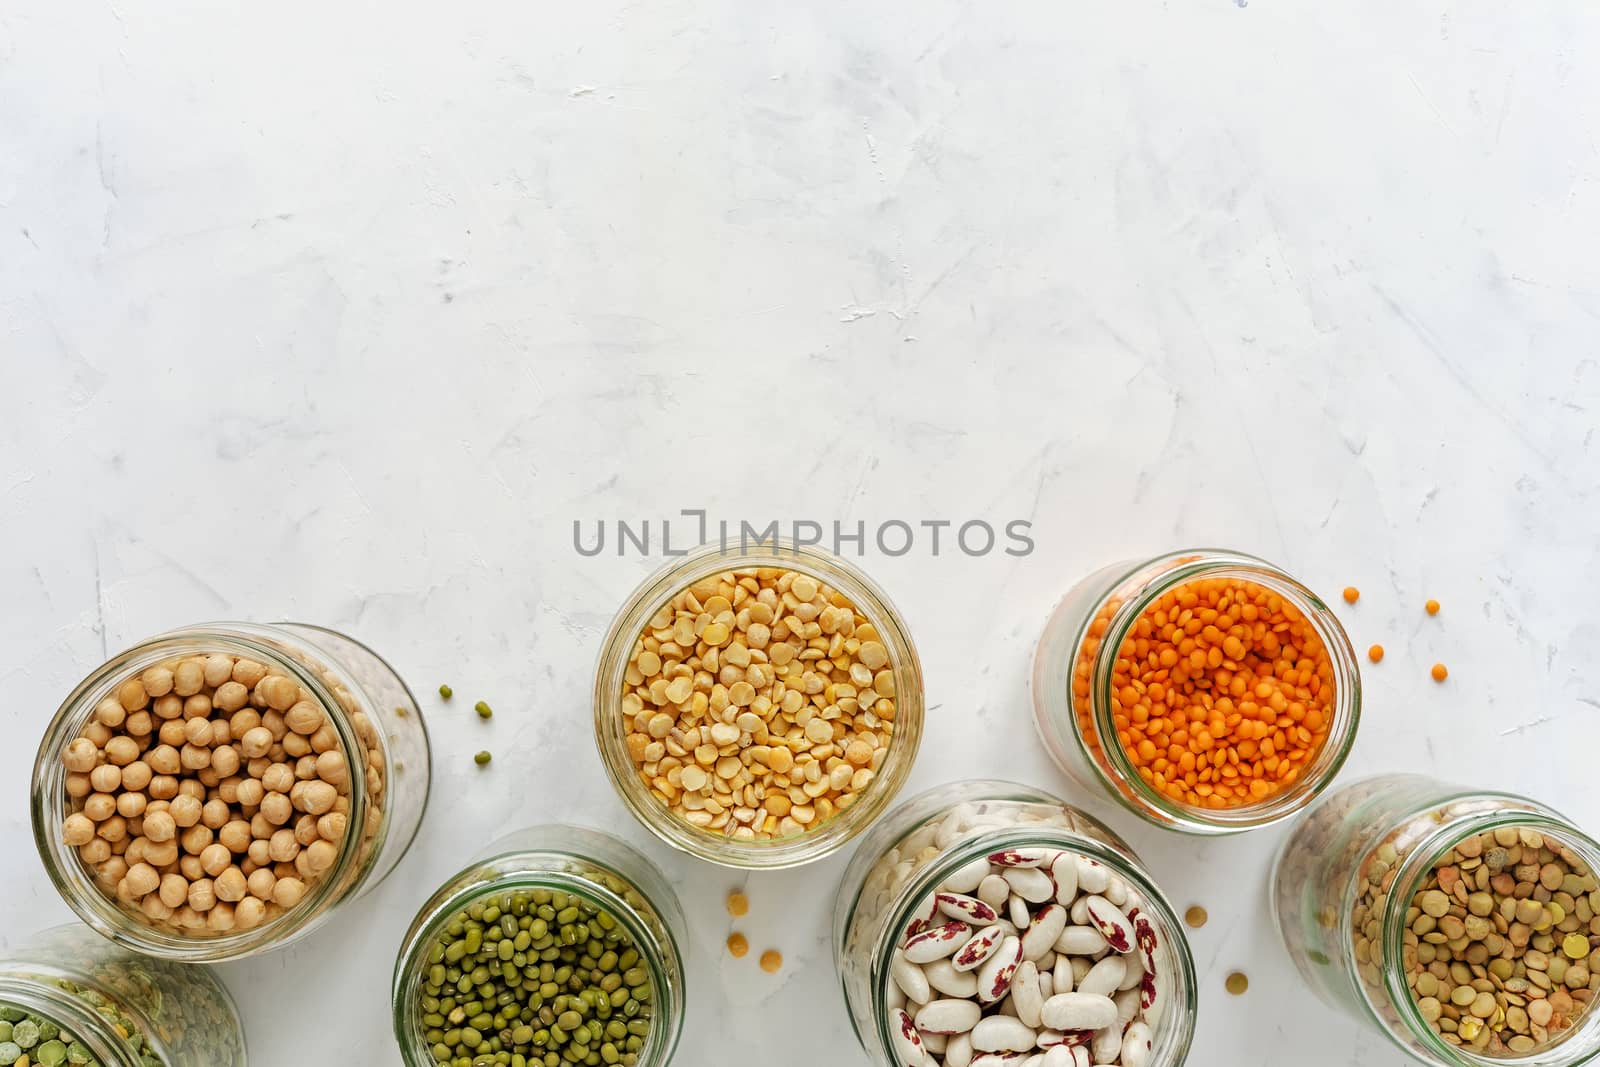 Open glass jars full of assorted dried legumes with mung beans, beans, lentils and peas over a white background in a healthy diet and nutrition concept